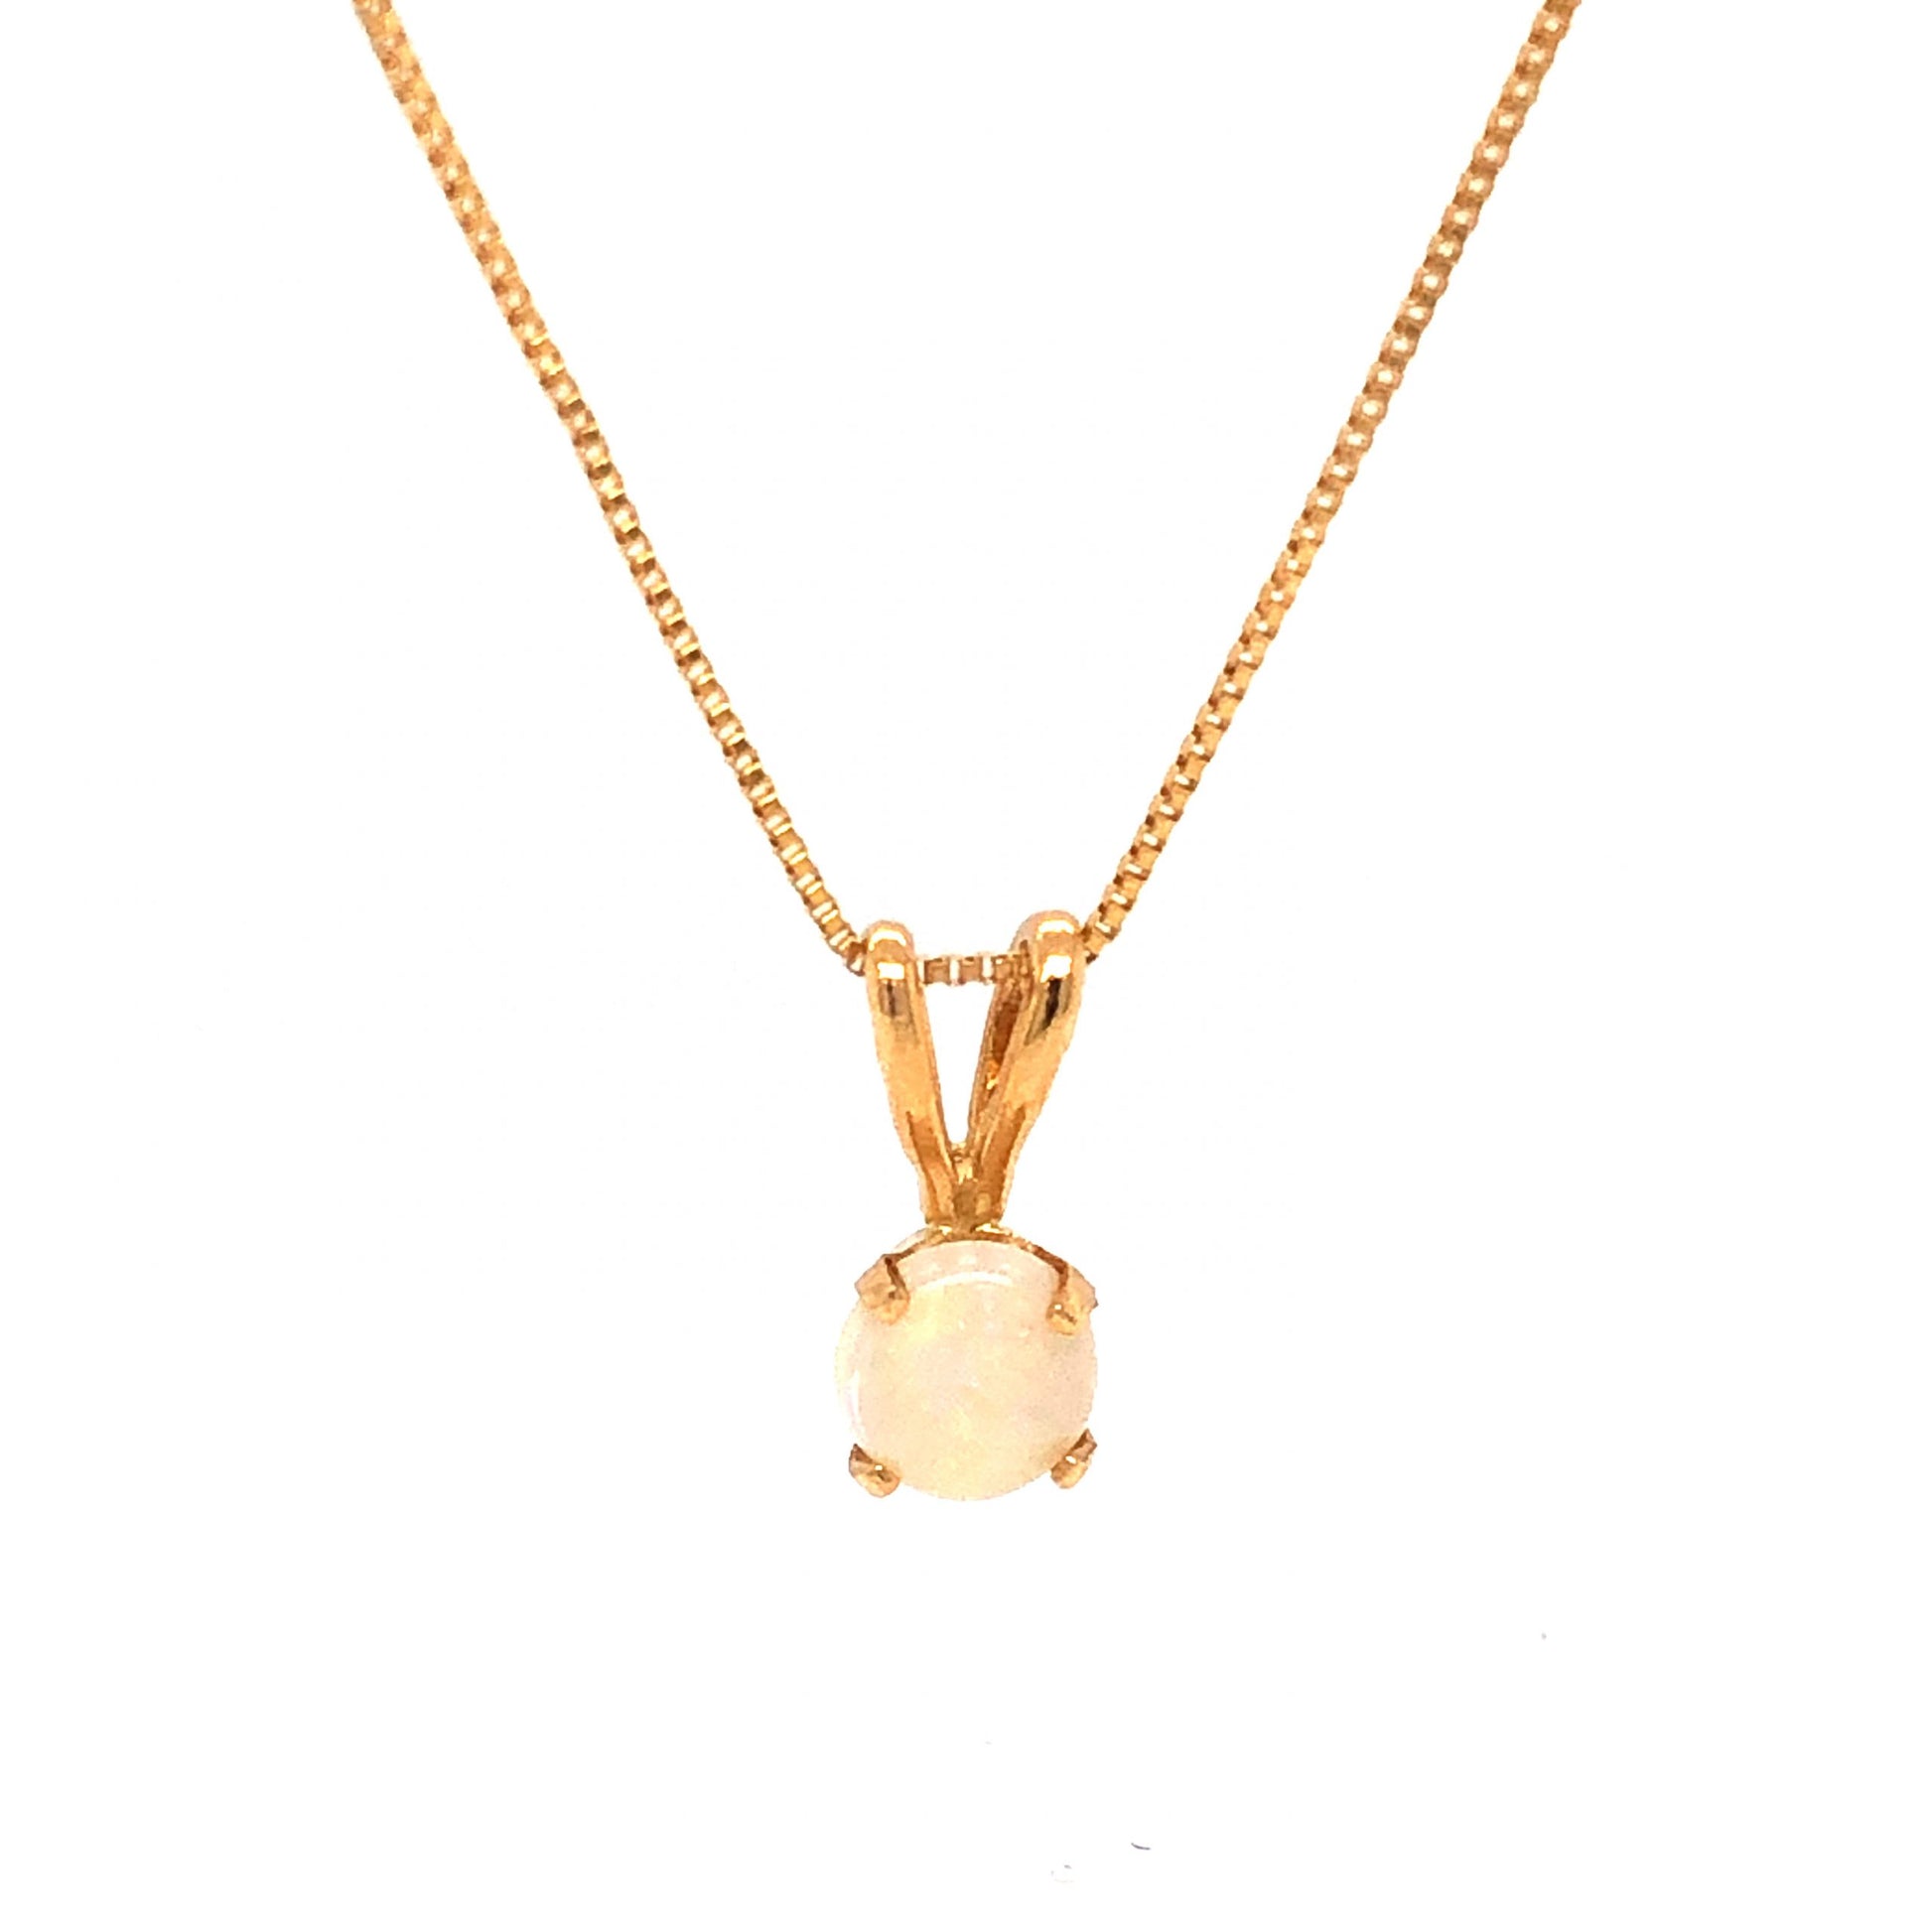 Opal Pendant Necklace in 14k Yellow GoldComposition: 14 Karat Yellow GoldTotal Gram Weight: 6.43 gInscription: 14KT ITALY